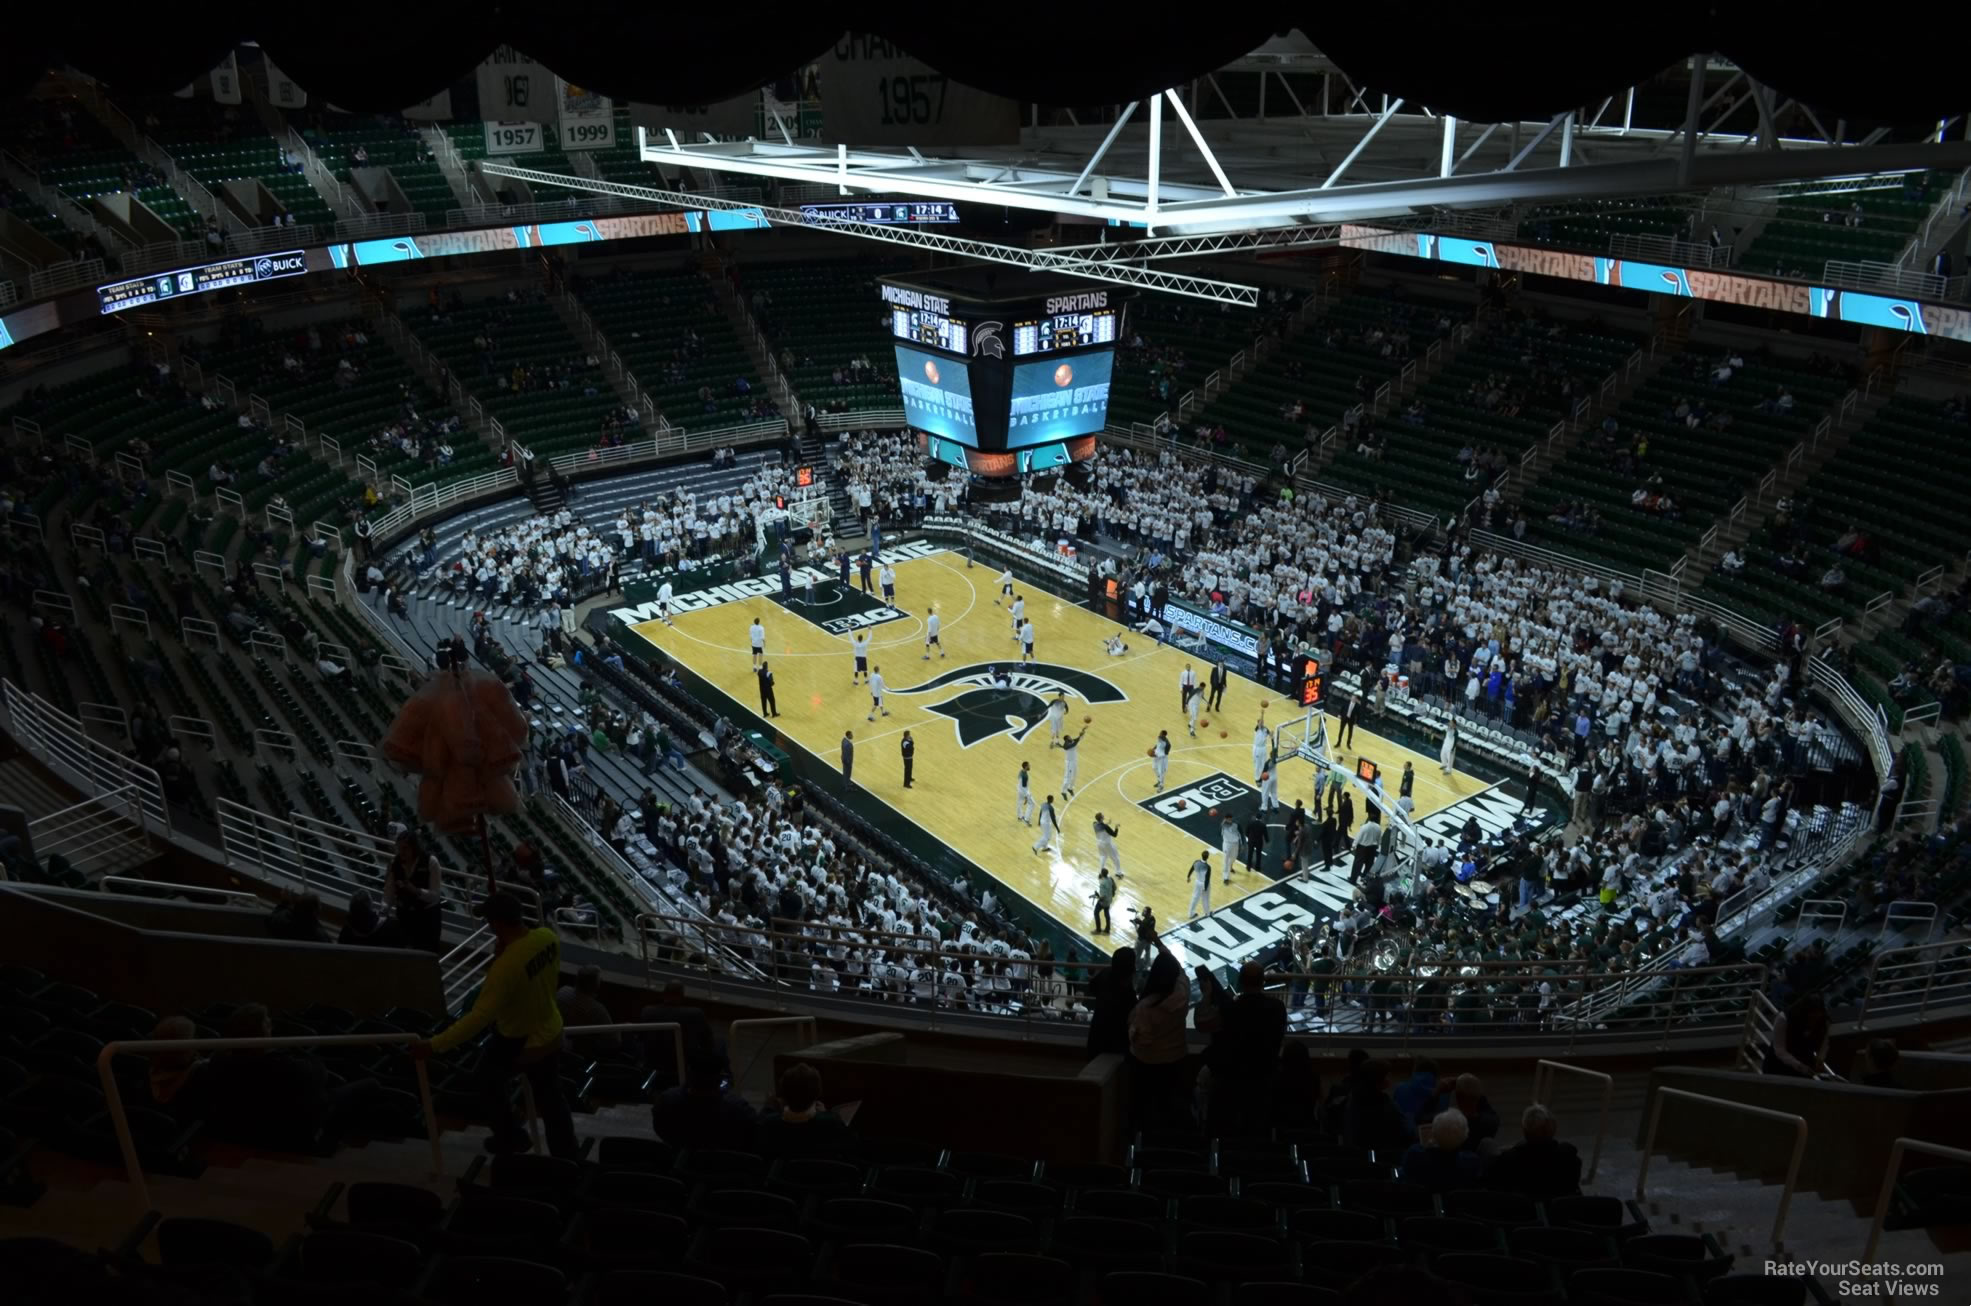 section 222, row 15 seat view  - breslin center